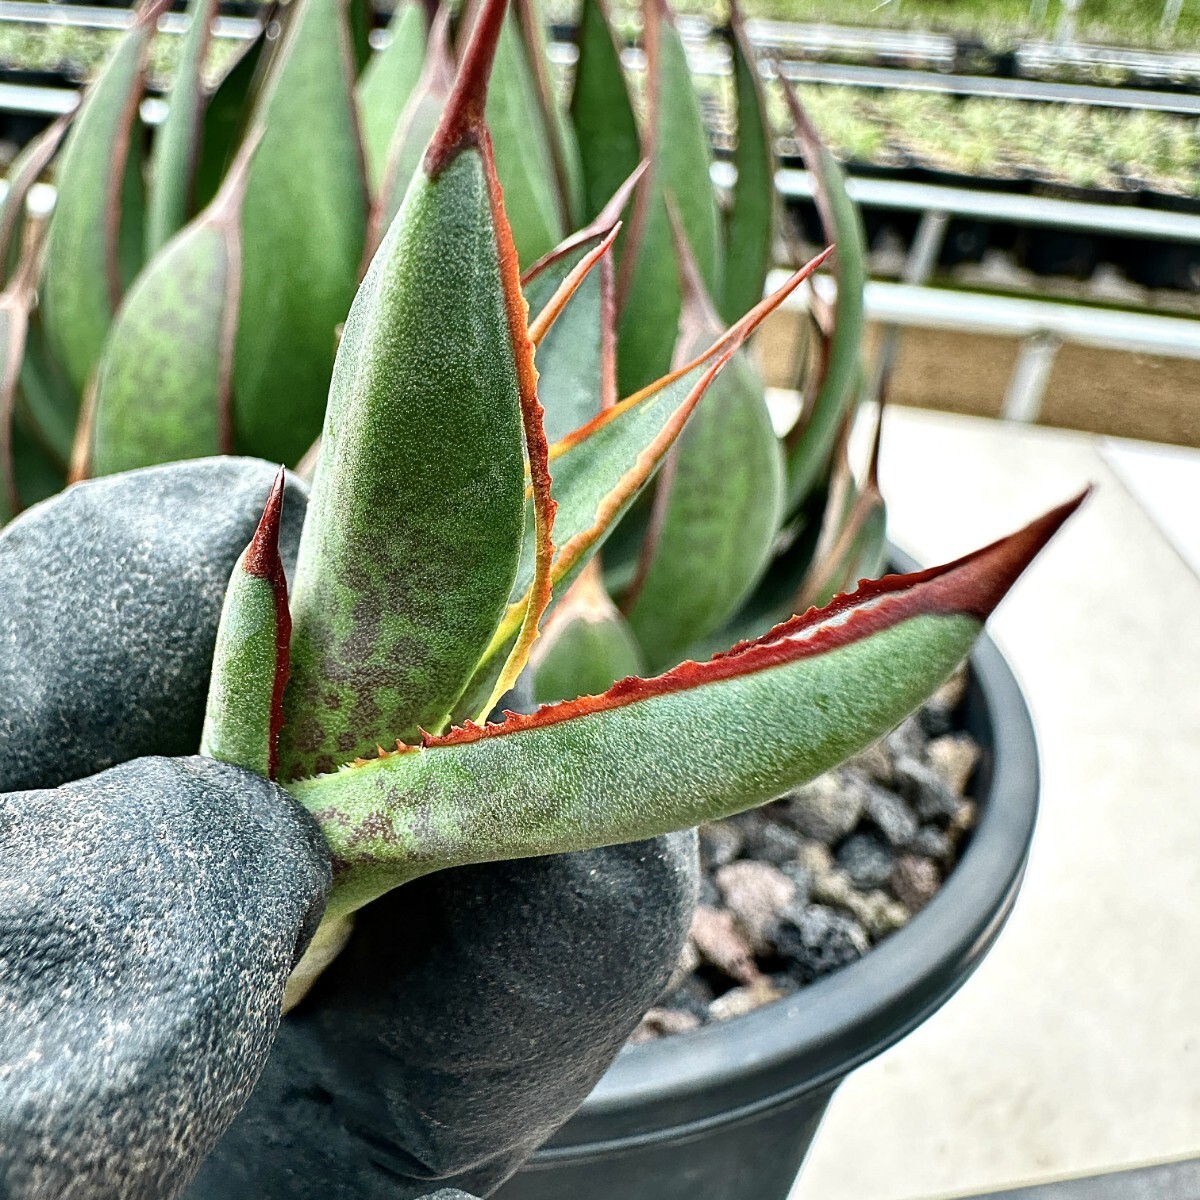 [Lj_plants]Z38 agave Mangave Praying Hands/ manga be. ... hand /Ultra Rare limitation stock beautiful stock. imported goods. carefuly selected finest quality . stock 2 stock including in a package .